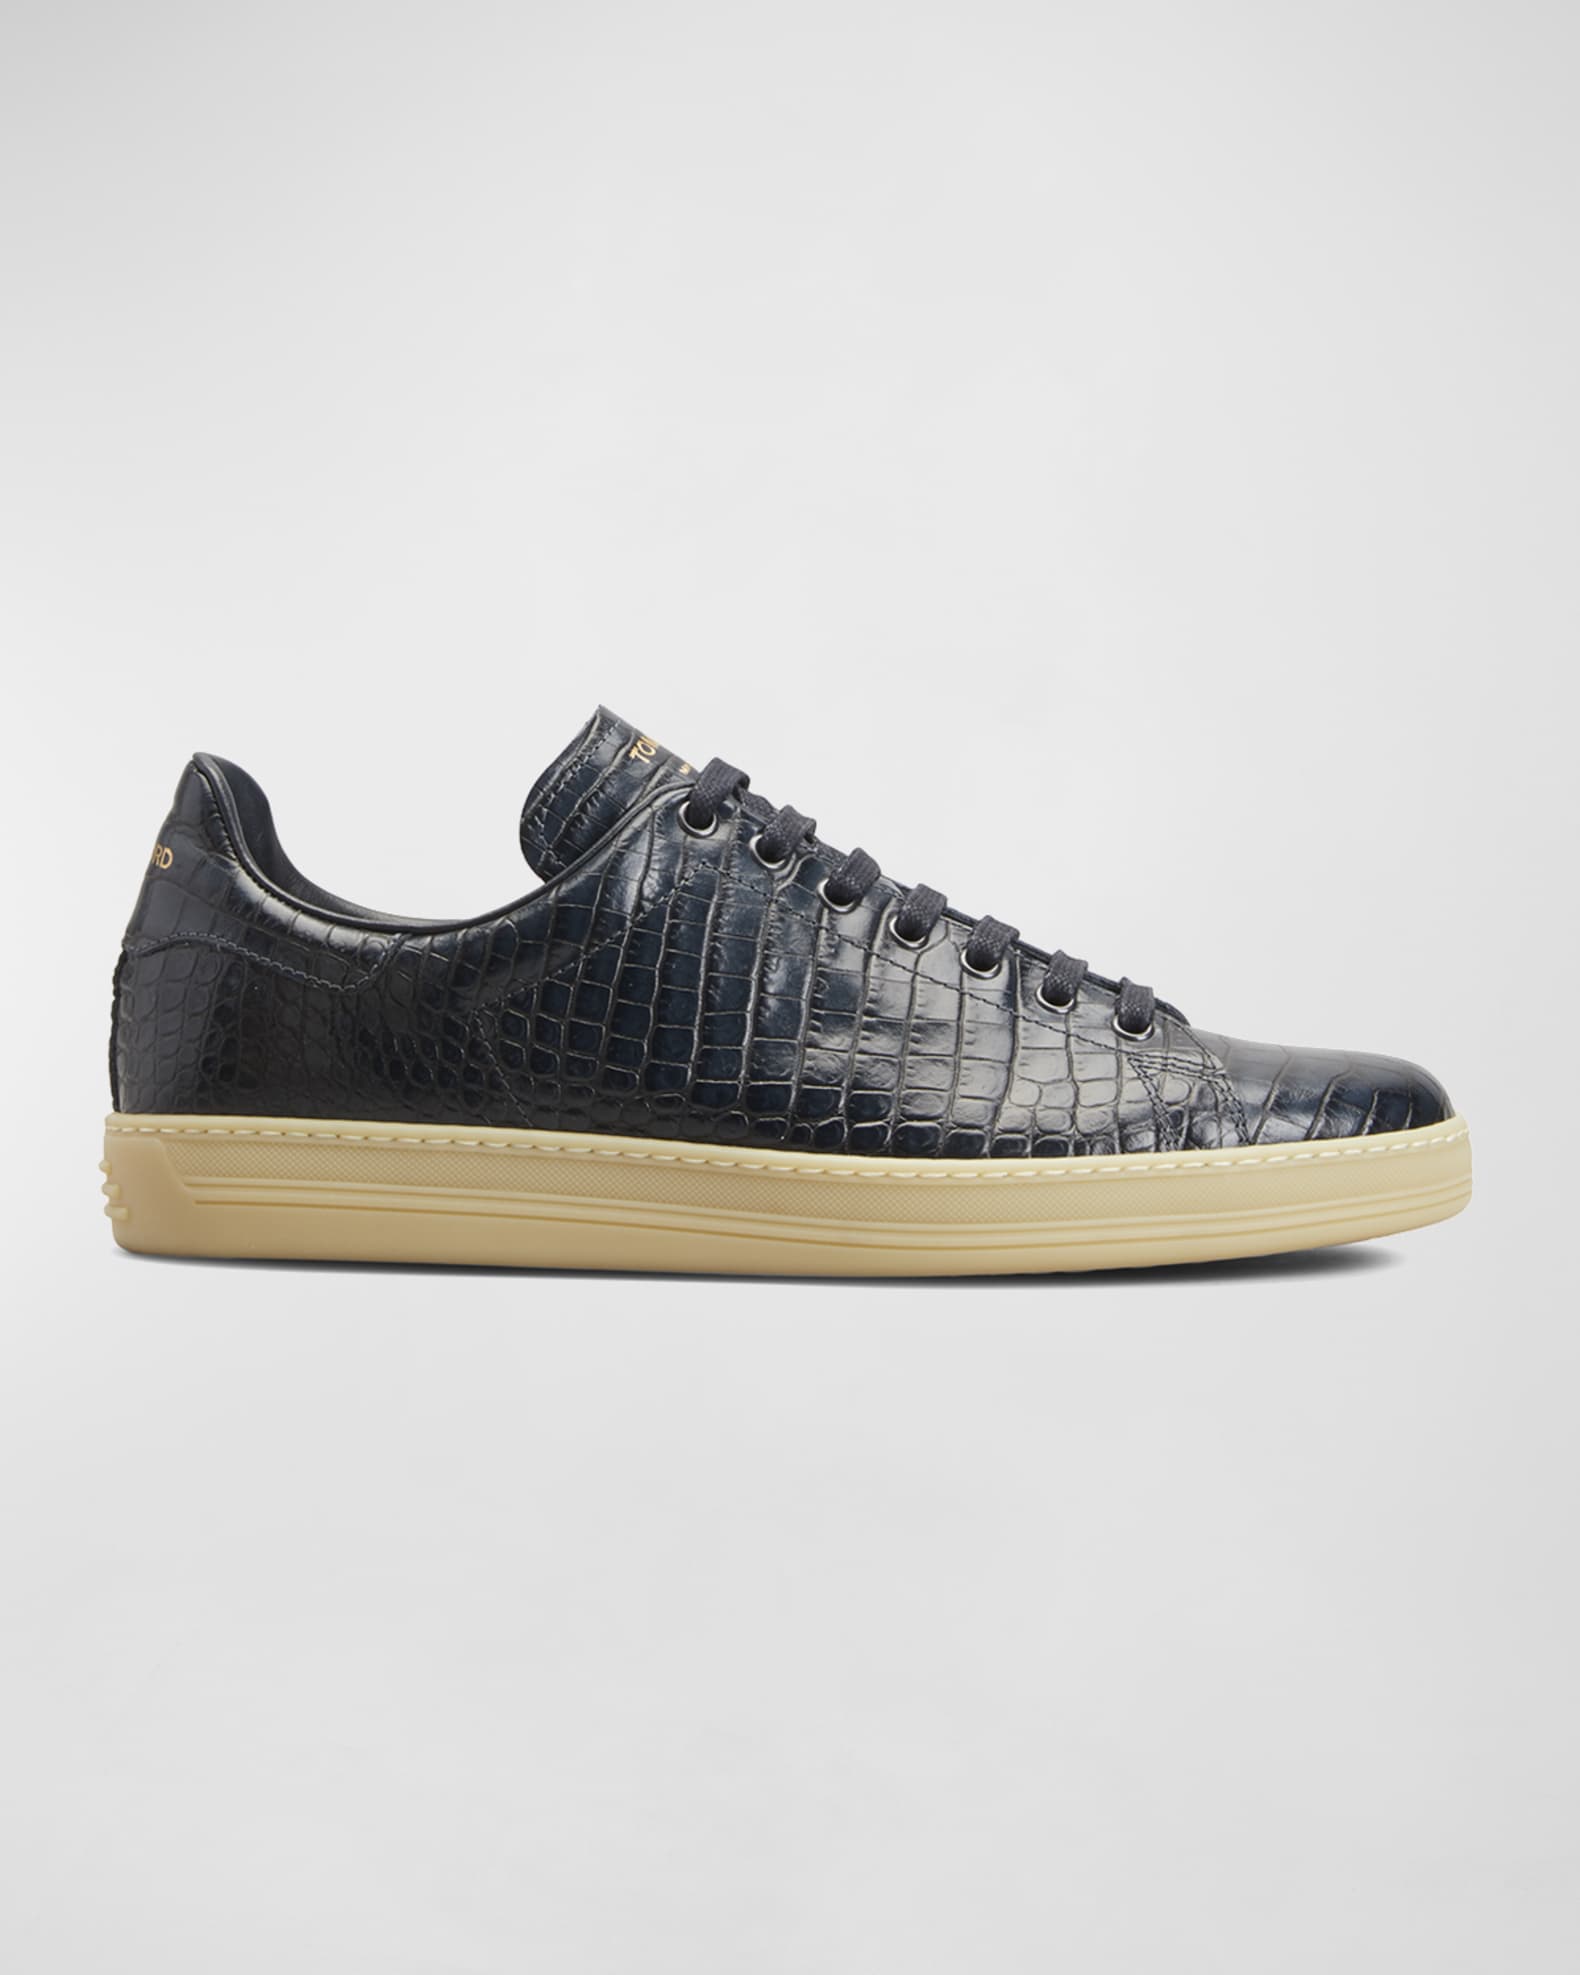 TOM FORD Men's Moc-Croc Leather Low-Top Sneakers | Neiman Marcus